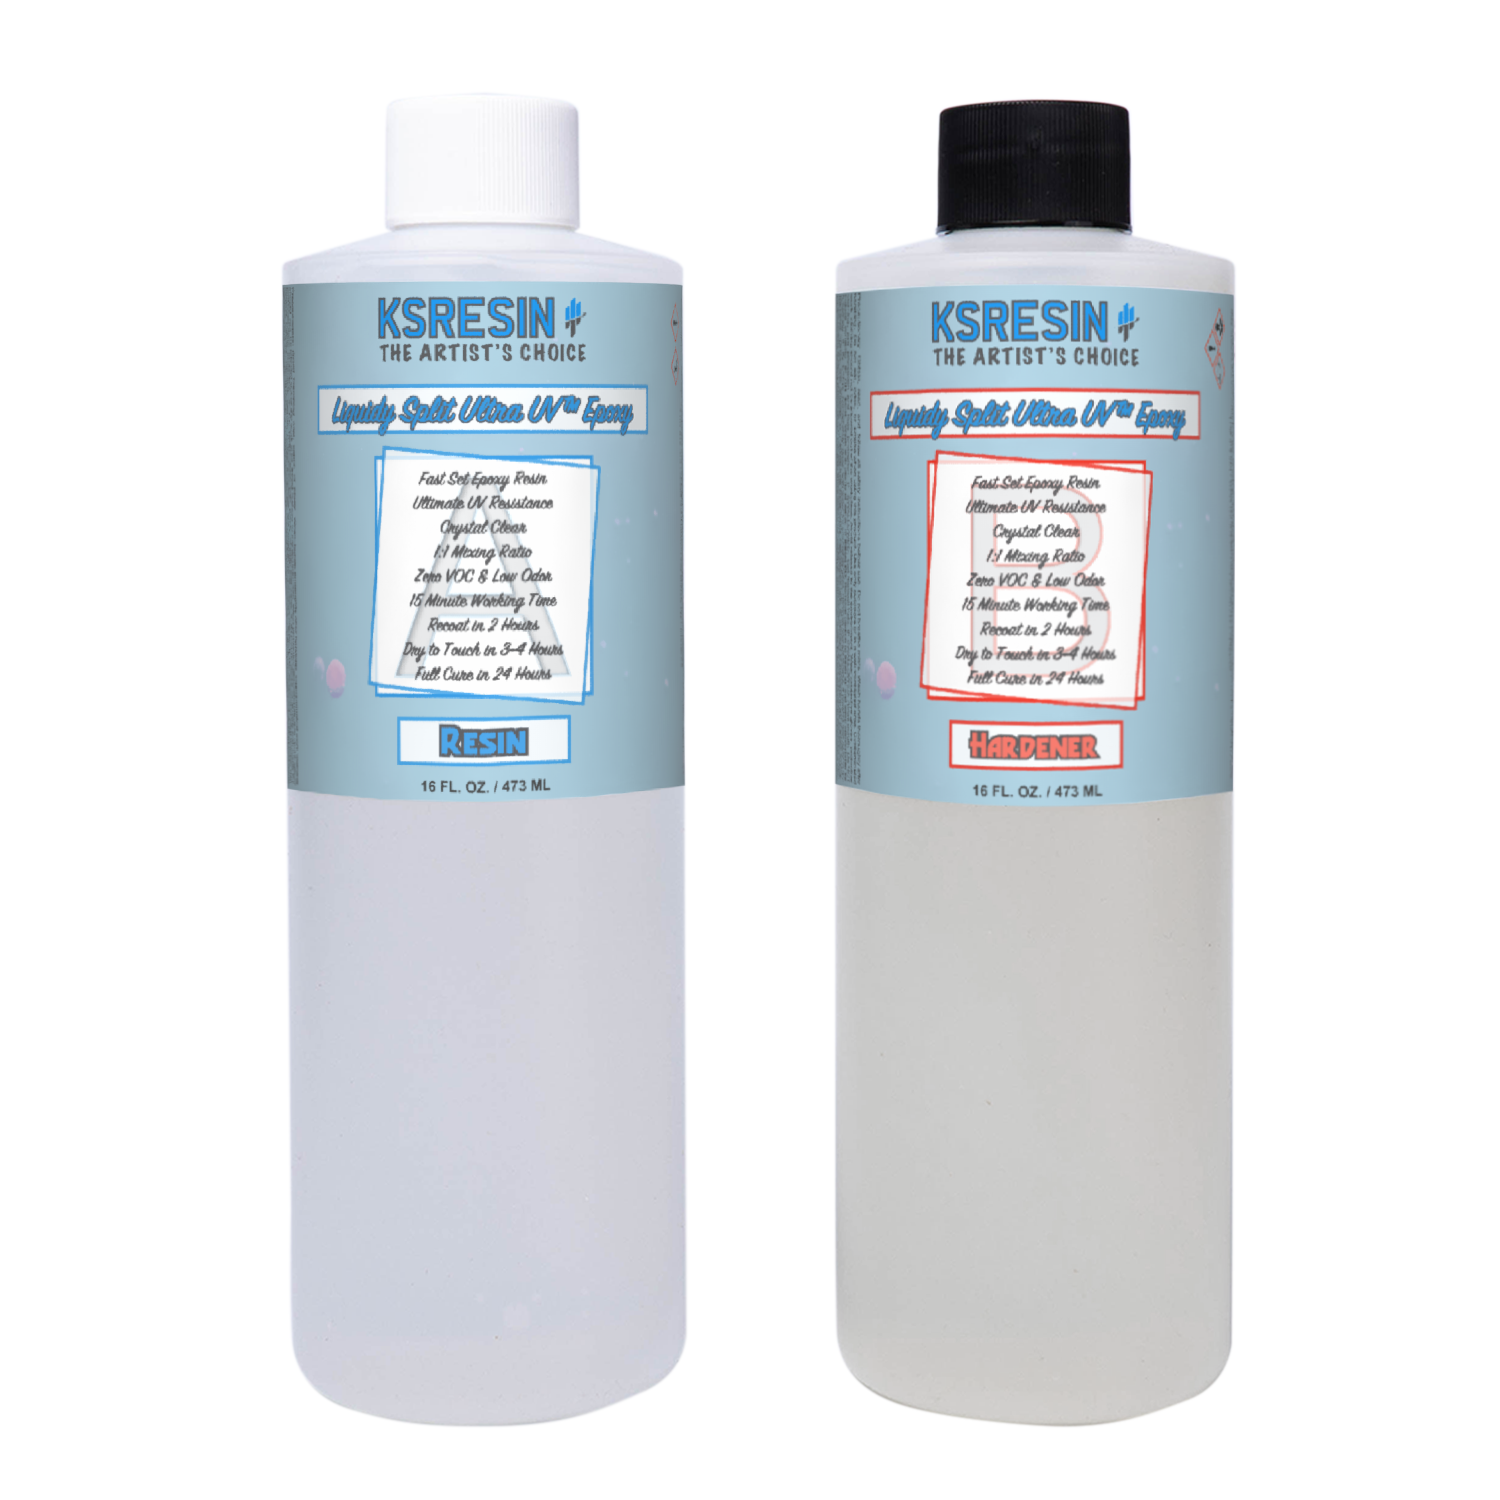 Coreas Hazells - NOW Available at ACE locations is EnviroTex Lite®, a water  clear 1:1 mix ration by volume epoxy resin used to coat surfaces. This  durable, resilient material requires no polishing